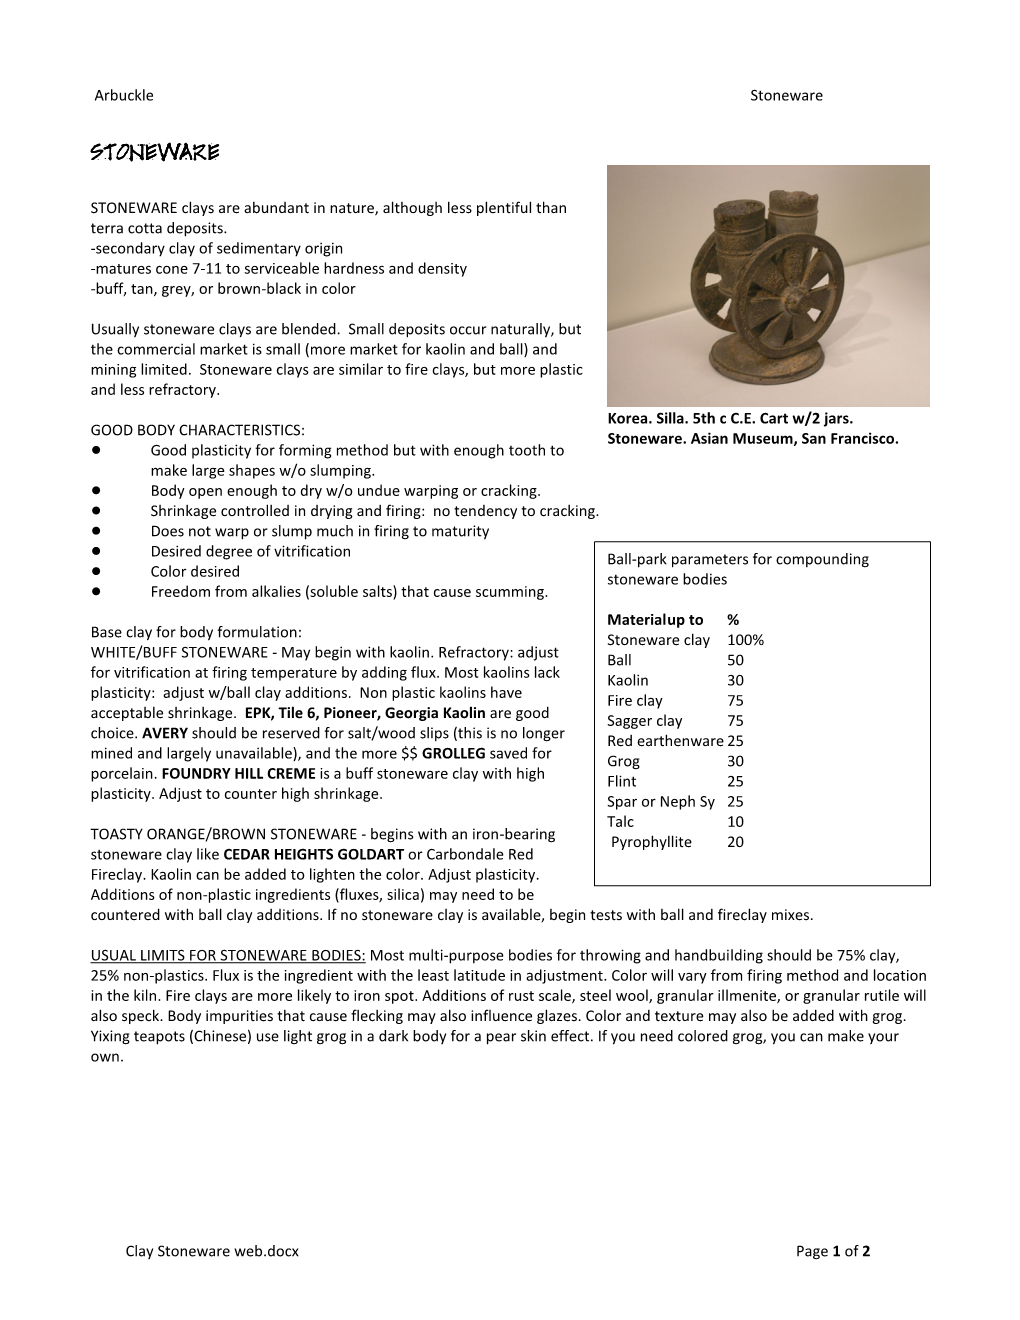 Clay Stoneware Web.Docx Page 1 of 2 Arbuckle Stoneware